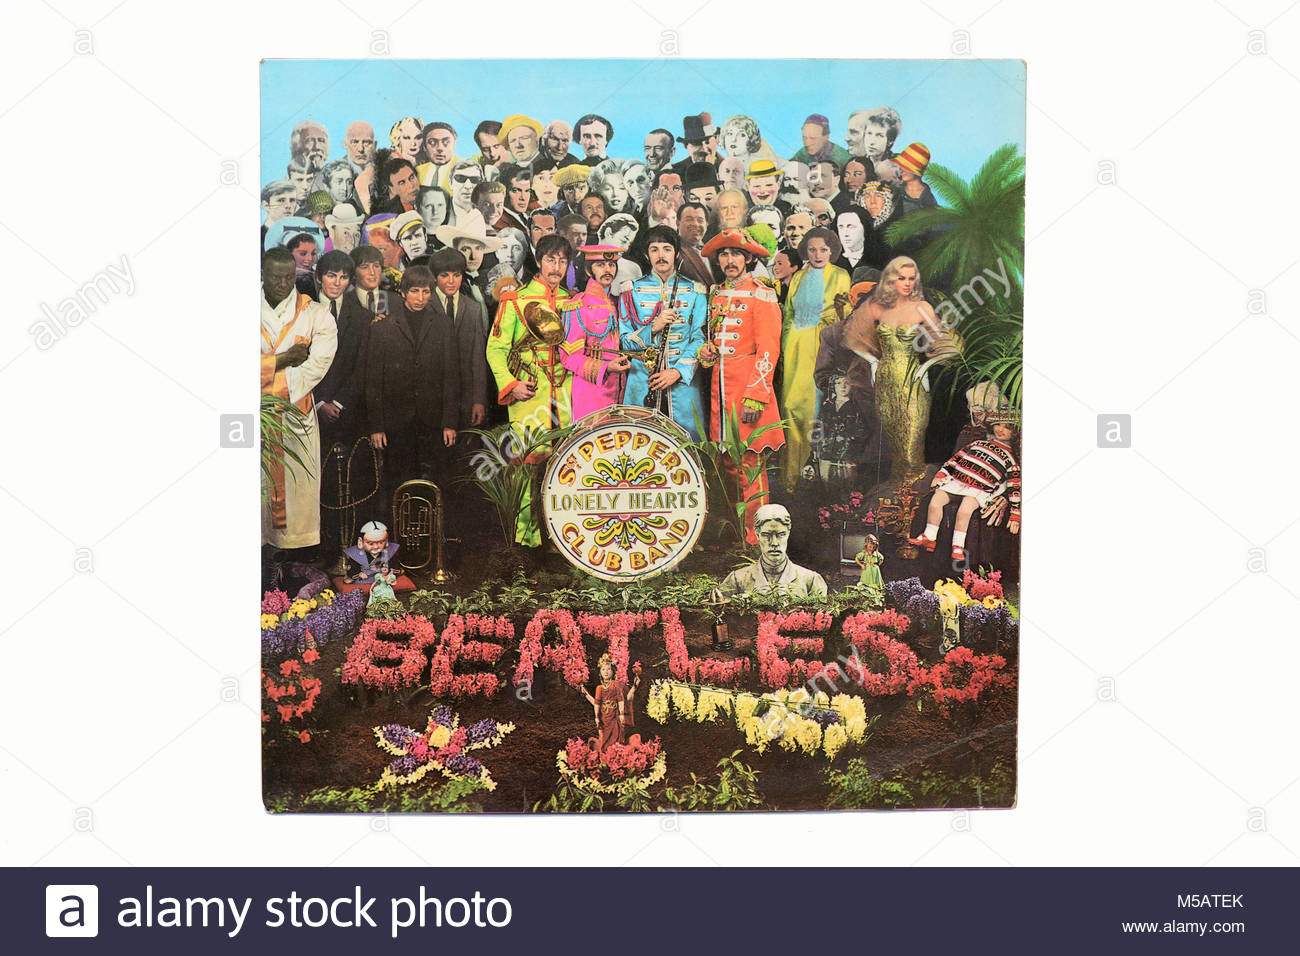 beatles sgt. peppers lonely hearts club band deluxe edition cd